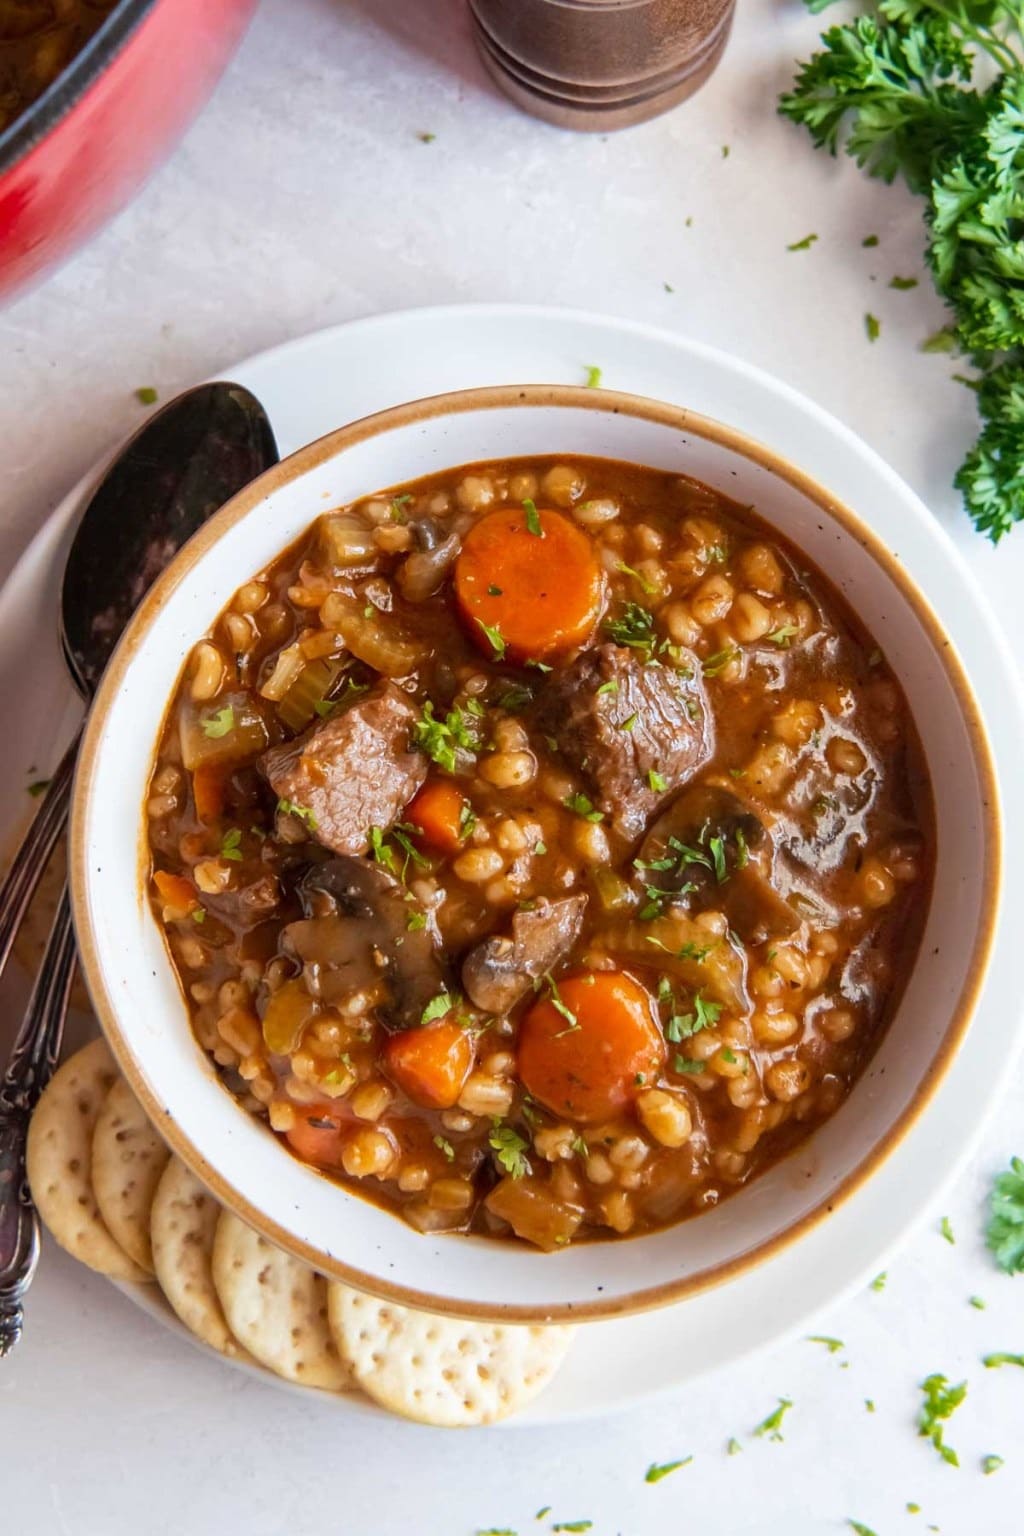 Warm beef barley soup with thick chuck roast and vegetables served with biscuits on the side